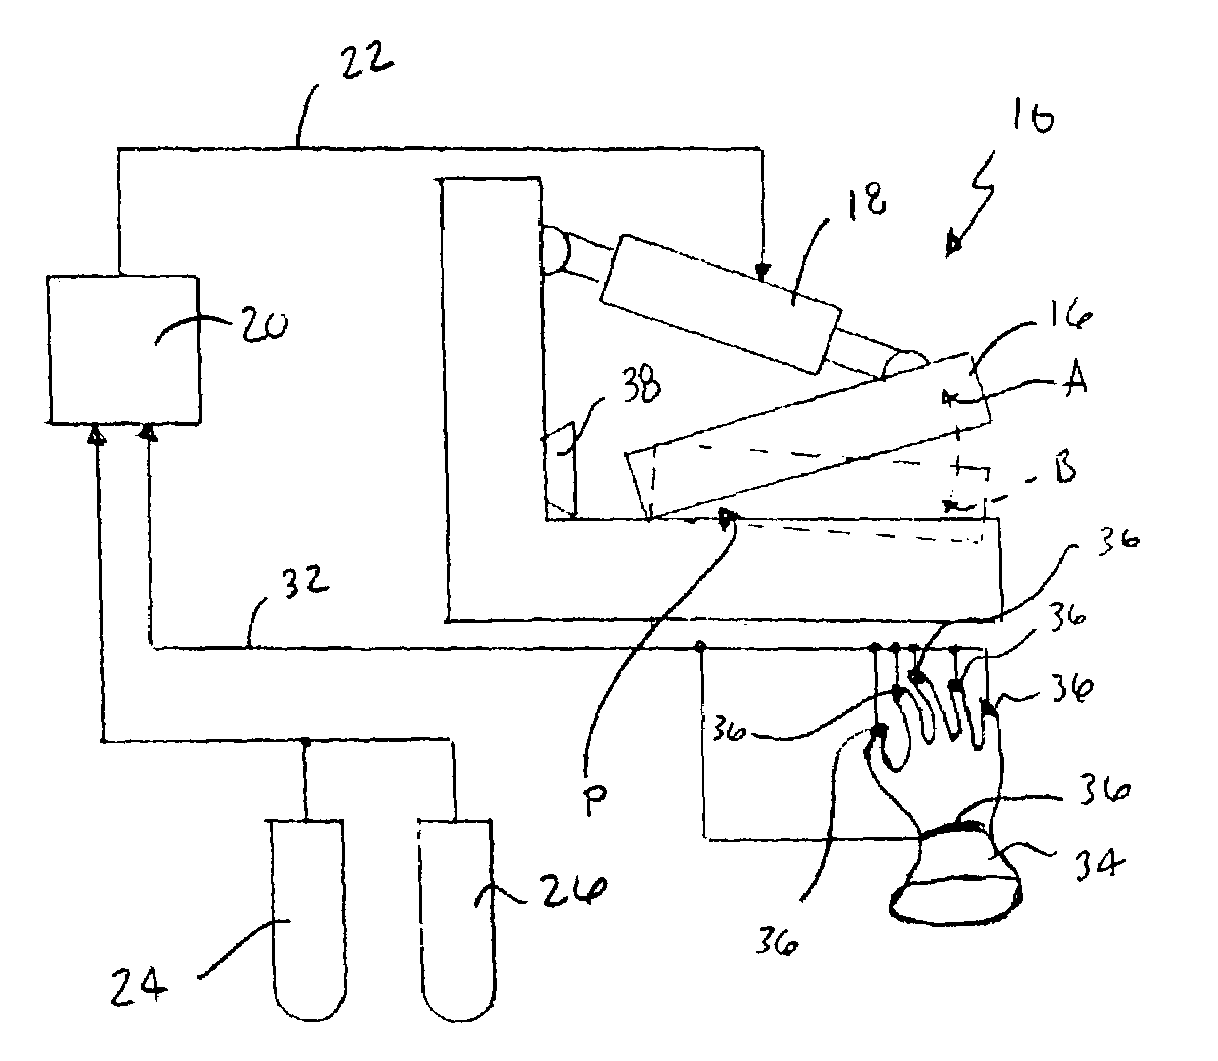 Safety-shutoff device for a manually fed processing machine